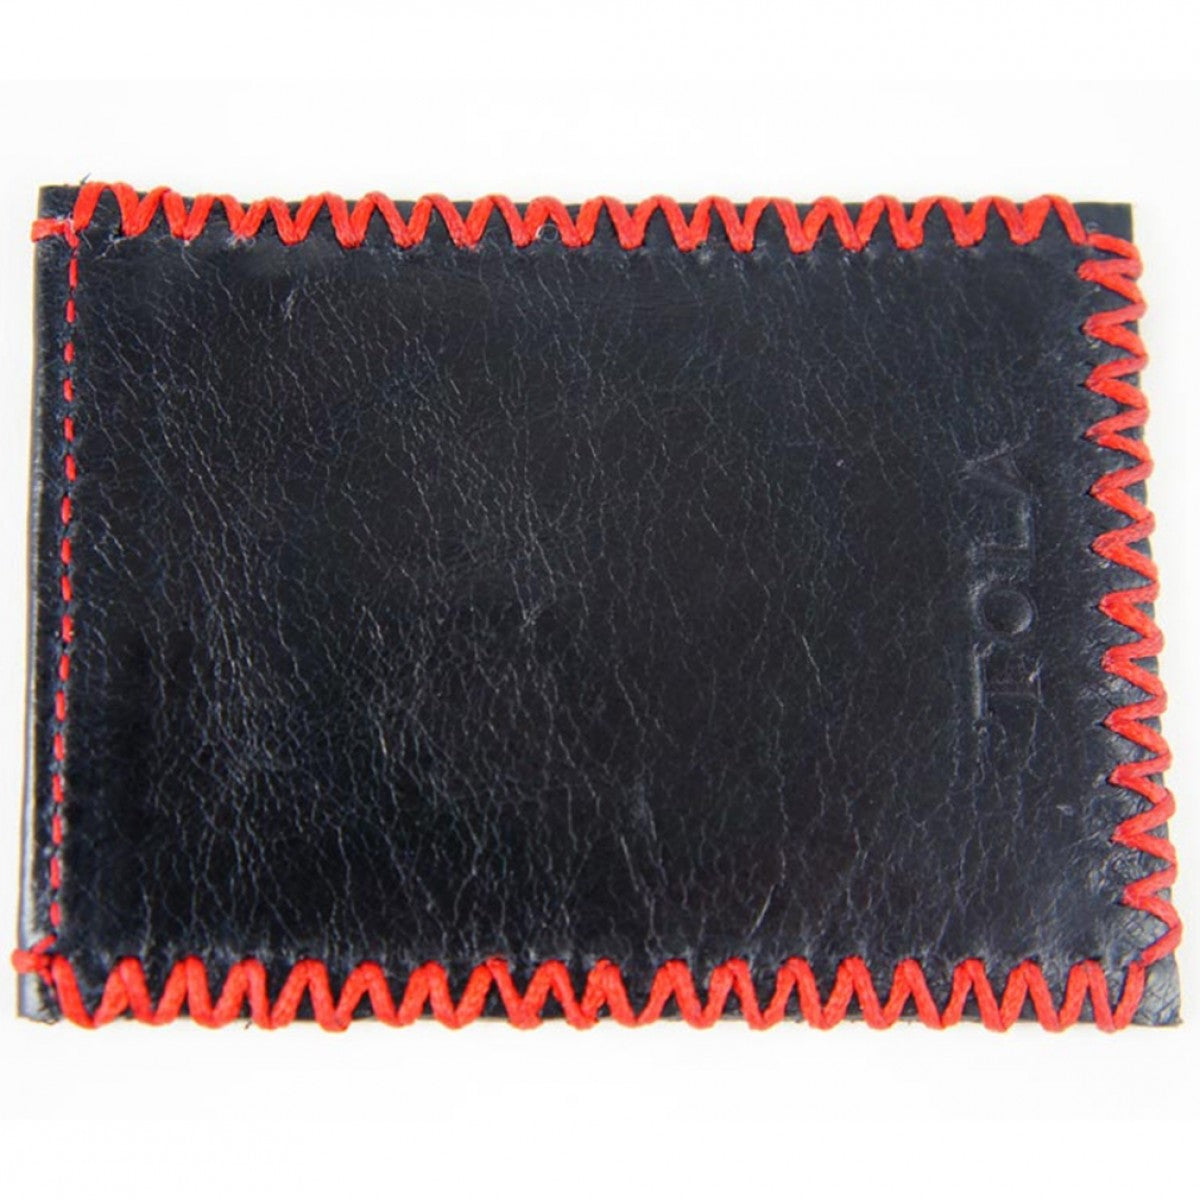 Tola Stanley Black Leather Credit Card Holder with Red Stitching